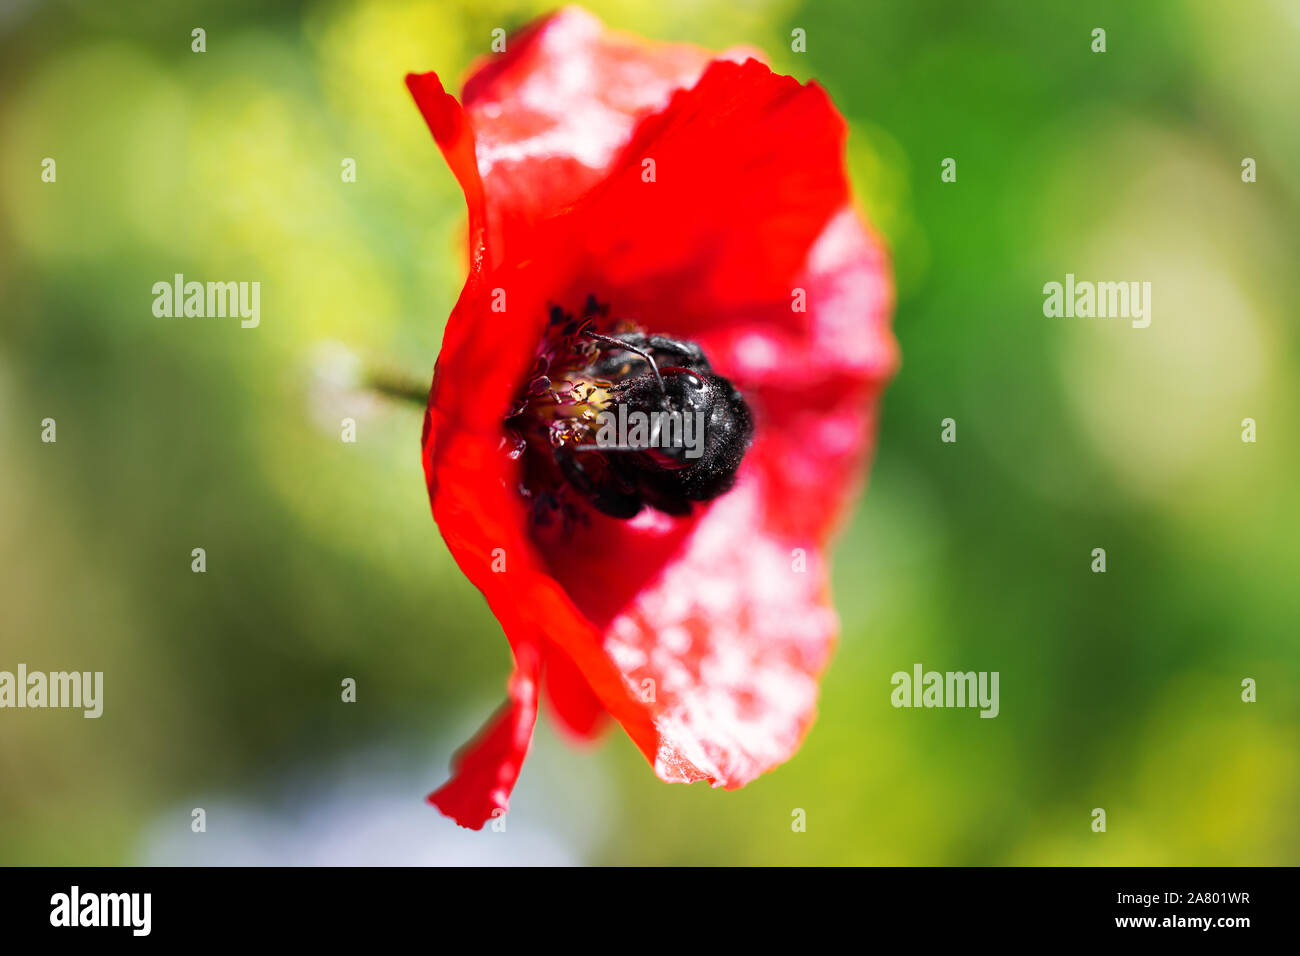 Xylocopa violacea on a red poppy blossom, protecting rare insects with a native wildflower meadow Stock Photo